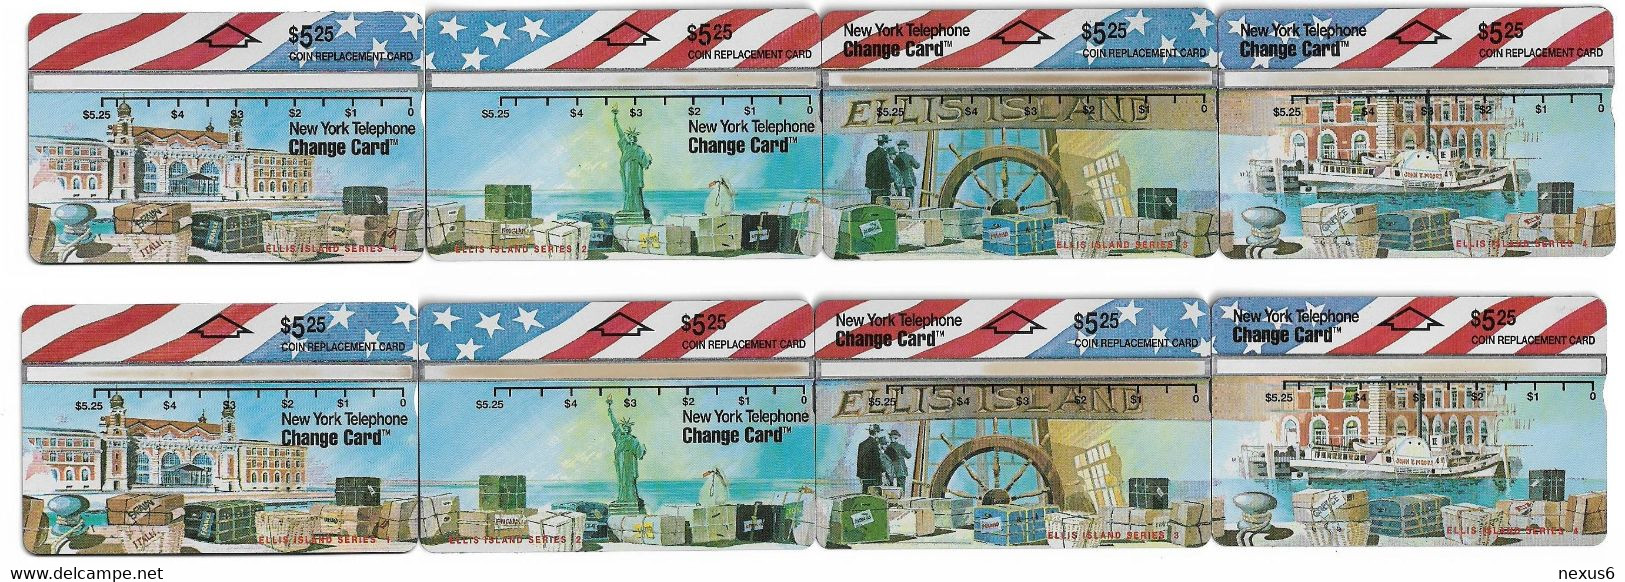 USA - Nynex (L&G) - 2 Full Puzzle Sets Ellis Island (ALL Batch Numbers), 1993, 5.25$, All Mint - [1] Holographic Cards (Landis & Gyr)